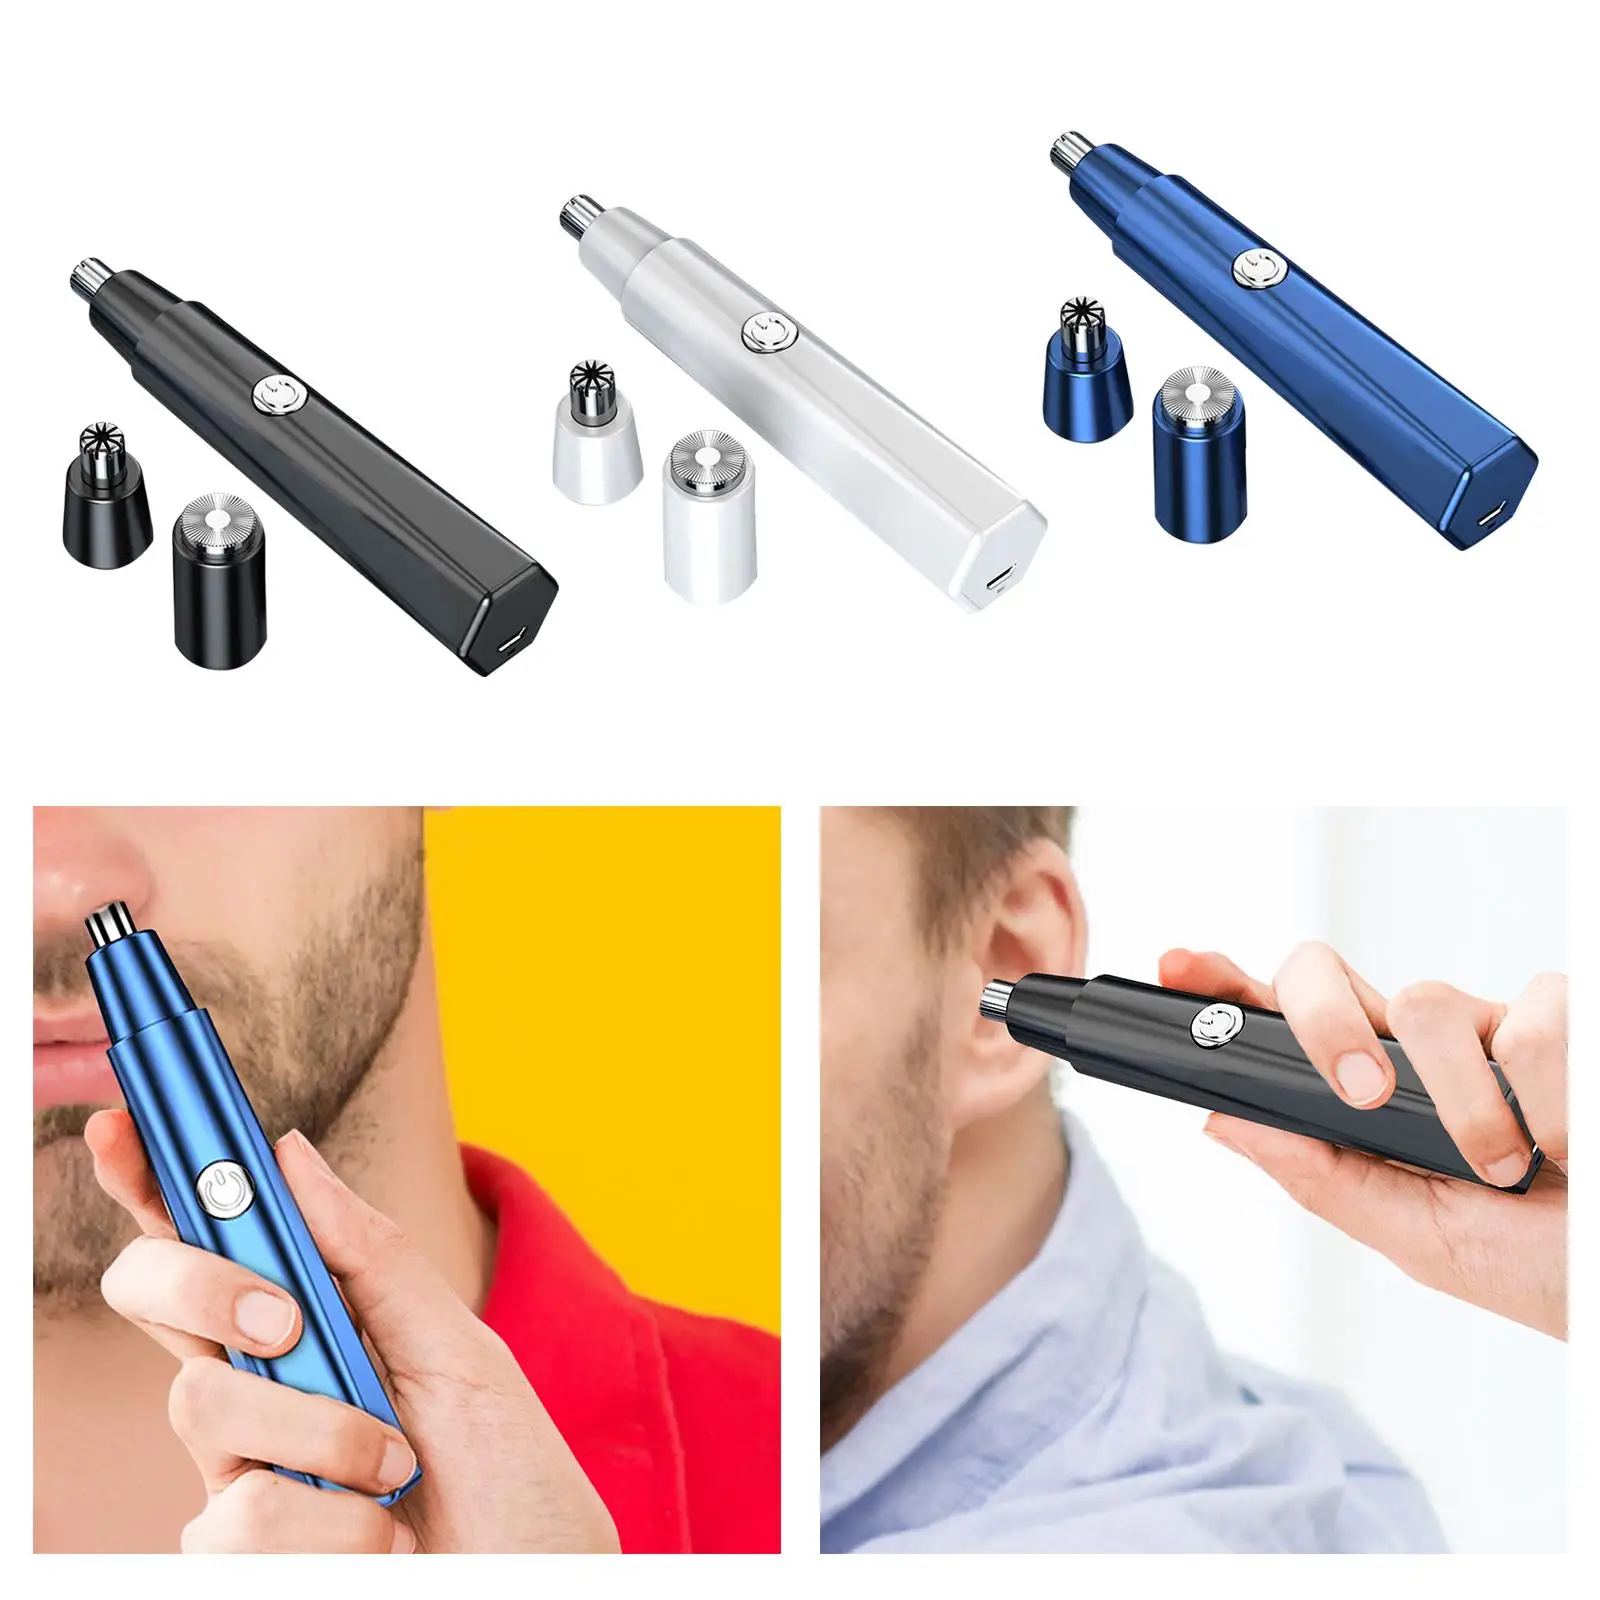 Ear and Nose Hair Trimmer IPX5 Waterproof Groomer Personal Trimmer